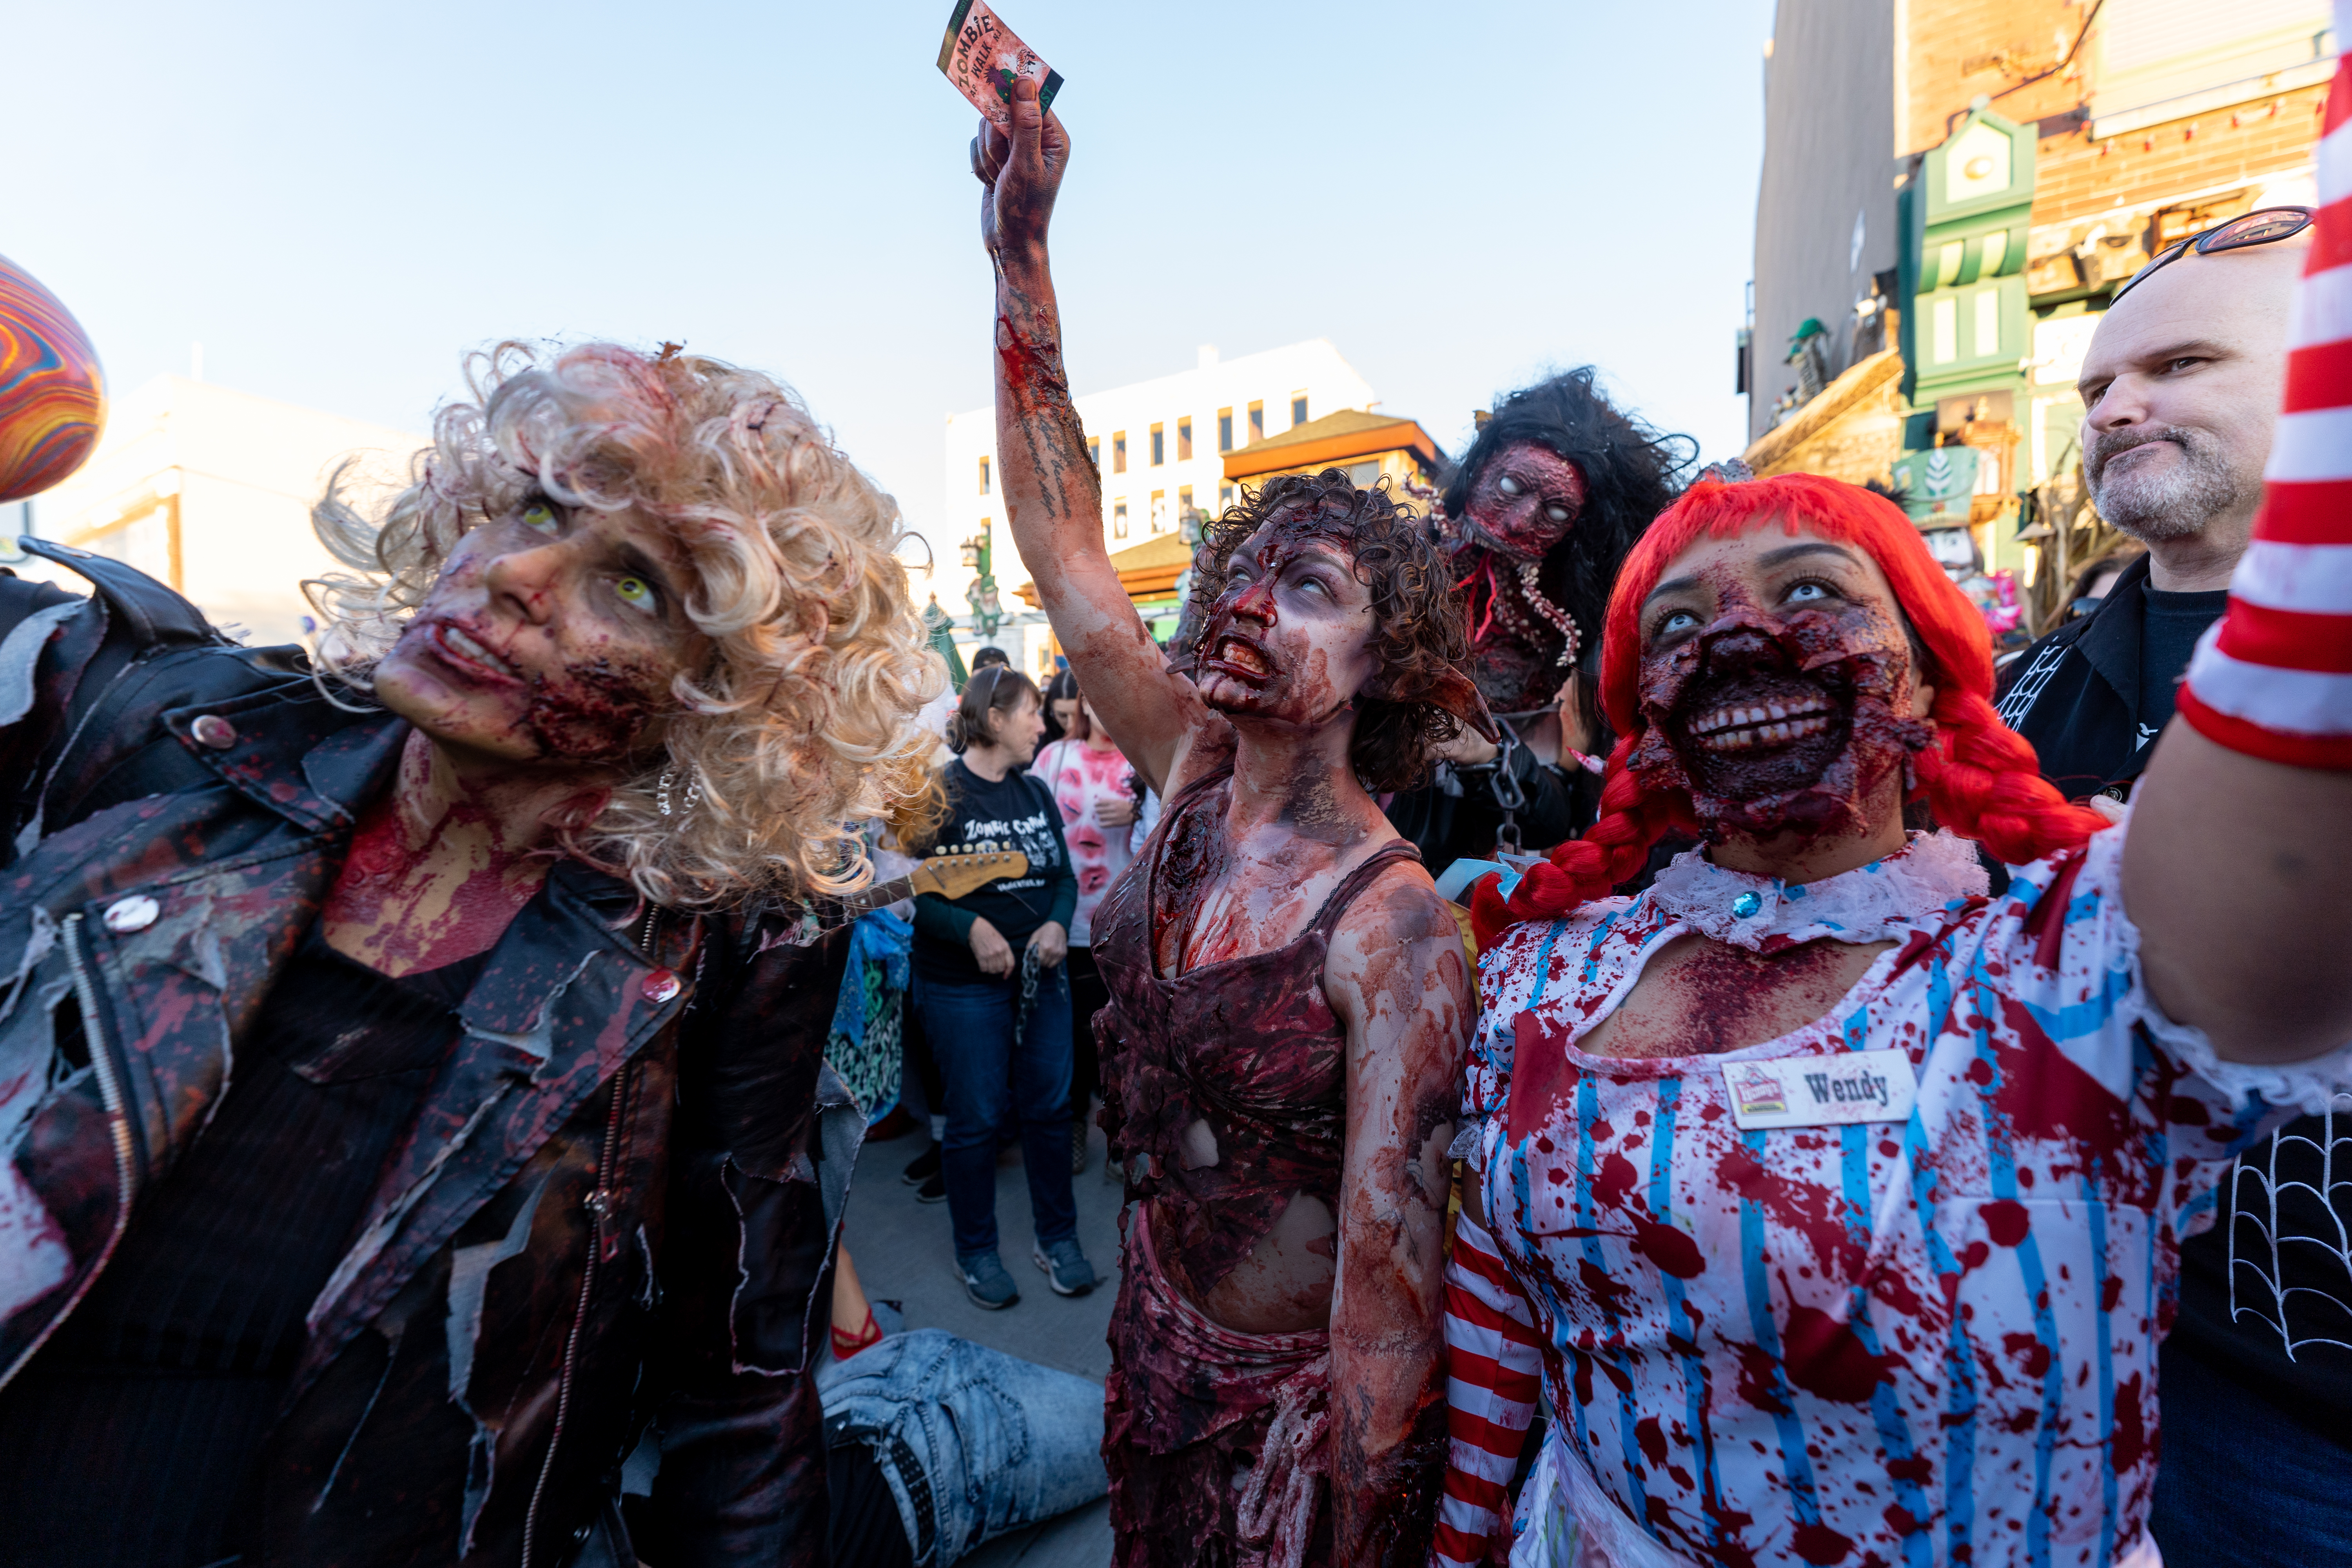 Zombies hold up their finalist tickets during the zombie costume contest single adult category during the 14th Asbury Park Zombie Walk in Asbury Park on Saturday, October 8, 2022. The zombie walk held its first themed year with the theme being 80's and 90's punk and metal.